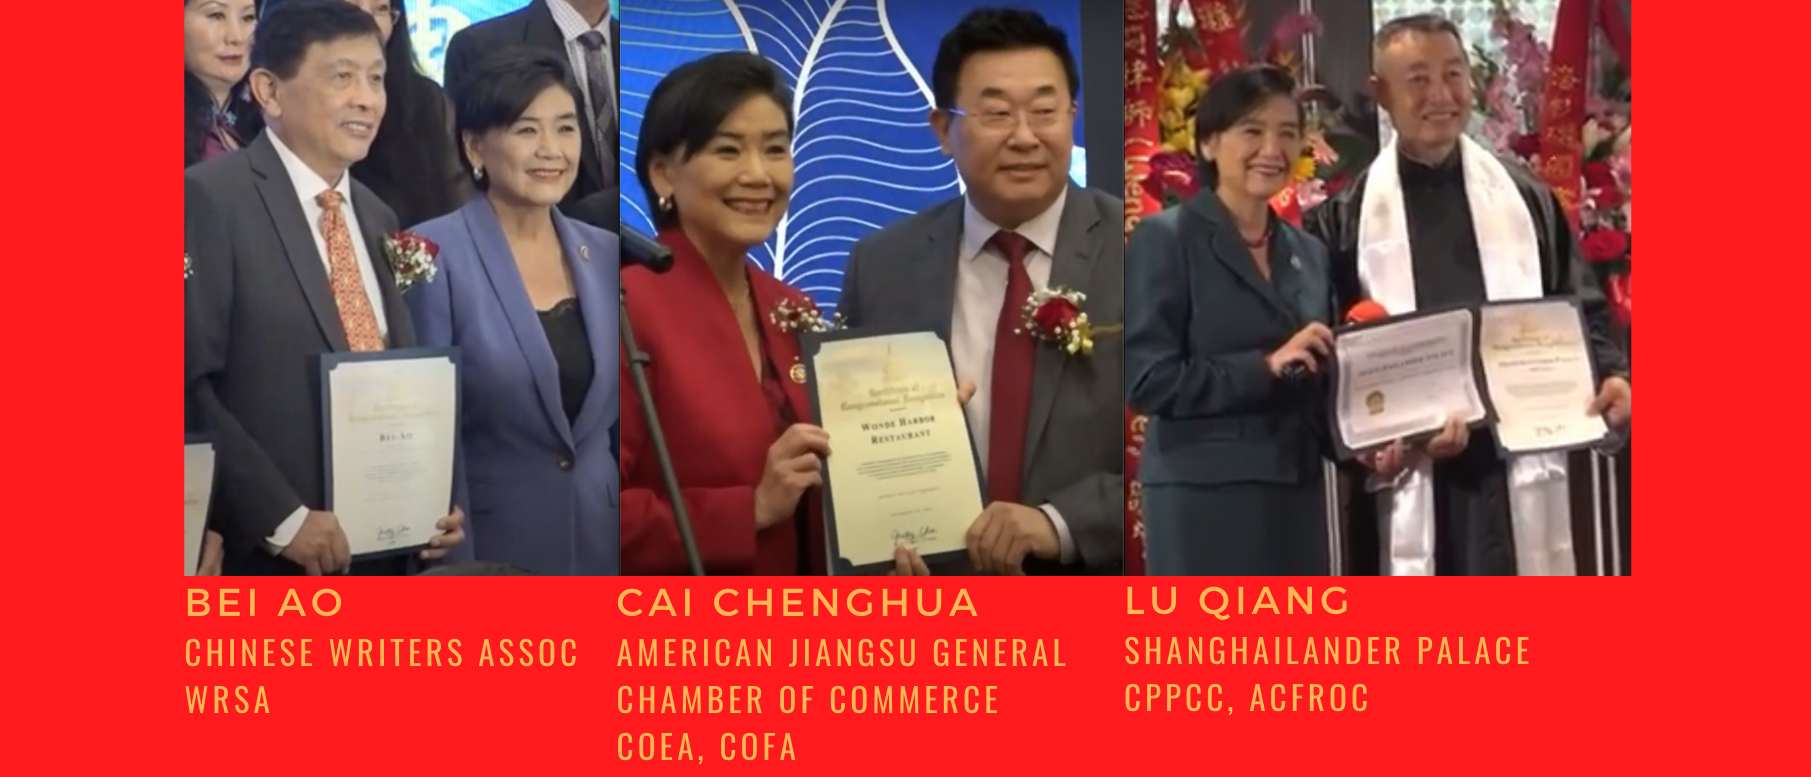 Rep. Judy Chu has granted certificates of Congressional recognition to 10 individuals who have belonged to alleged fronts serving the United Front Work Department of the Chinese Communist Party and has also held honorary positions in two organizations with alleged Chinese intelligence ties. Image created by the Daily Caller News Foundation.